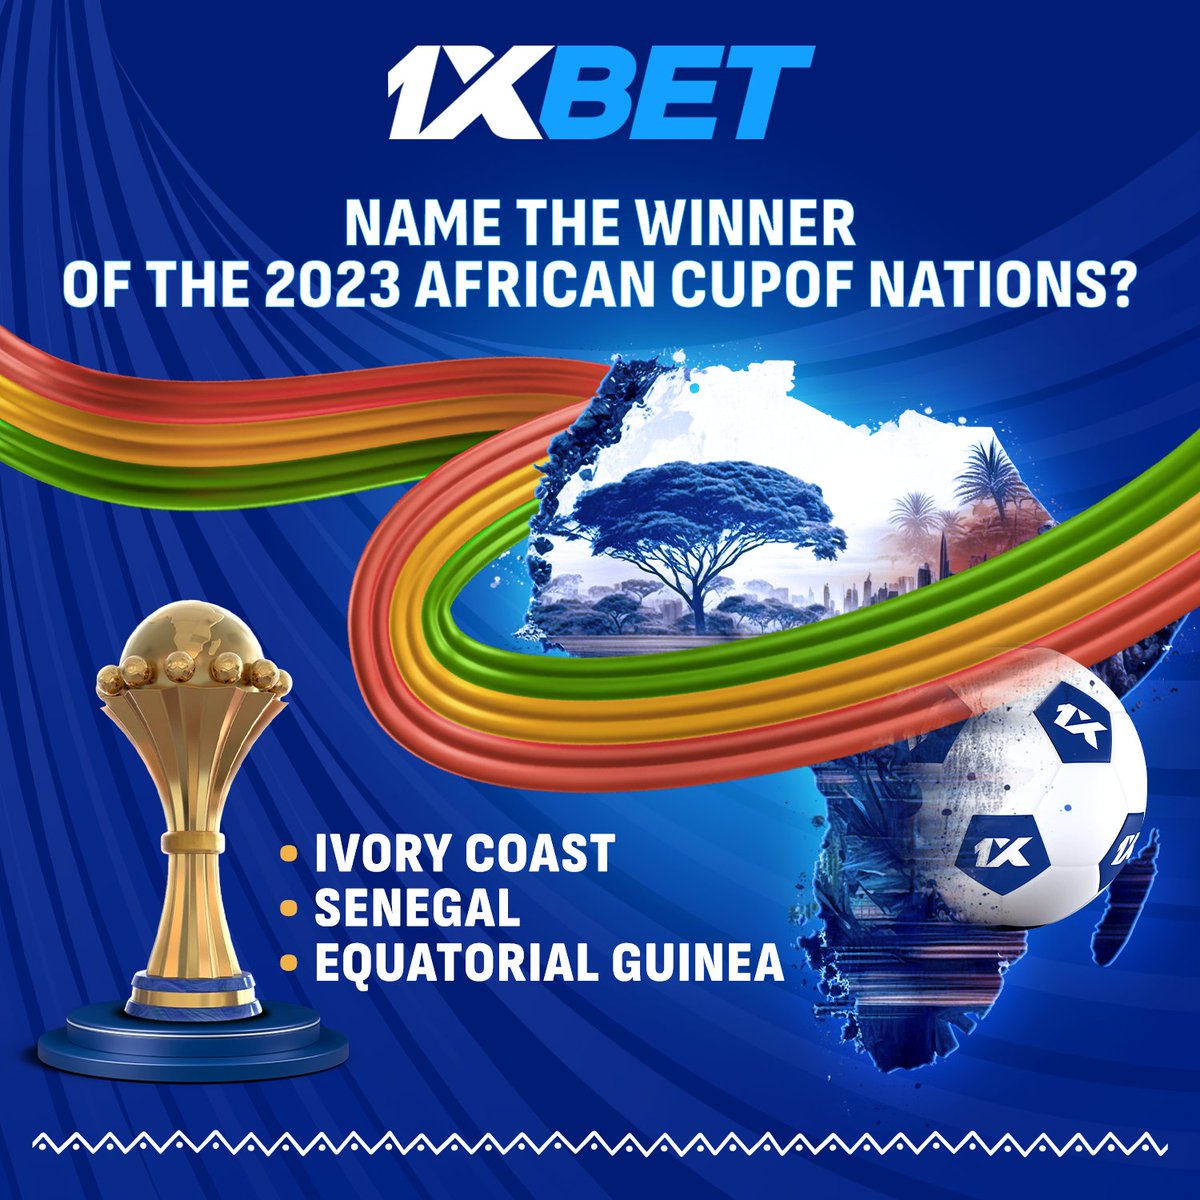 Join our African Soccer Safari Giveaway! 🇿🇦
Here's how to enter:
☑️ Follow us
❔ Answer the carousel questions in the comments and add your Client ID
Have the chance to win free bets worth 120 GHS! 🎁

5 winners will be announced on May 27th. 

#1xBet #Africaday #1xBetGiveaway